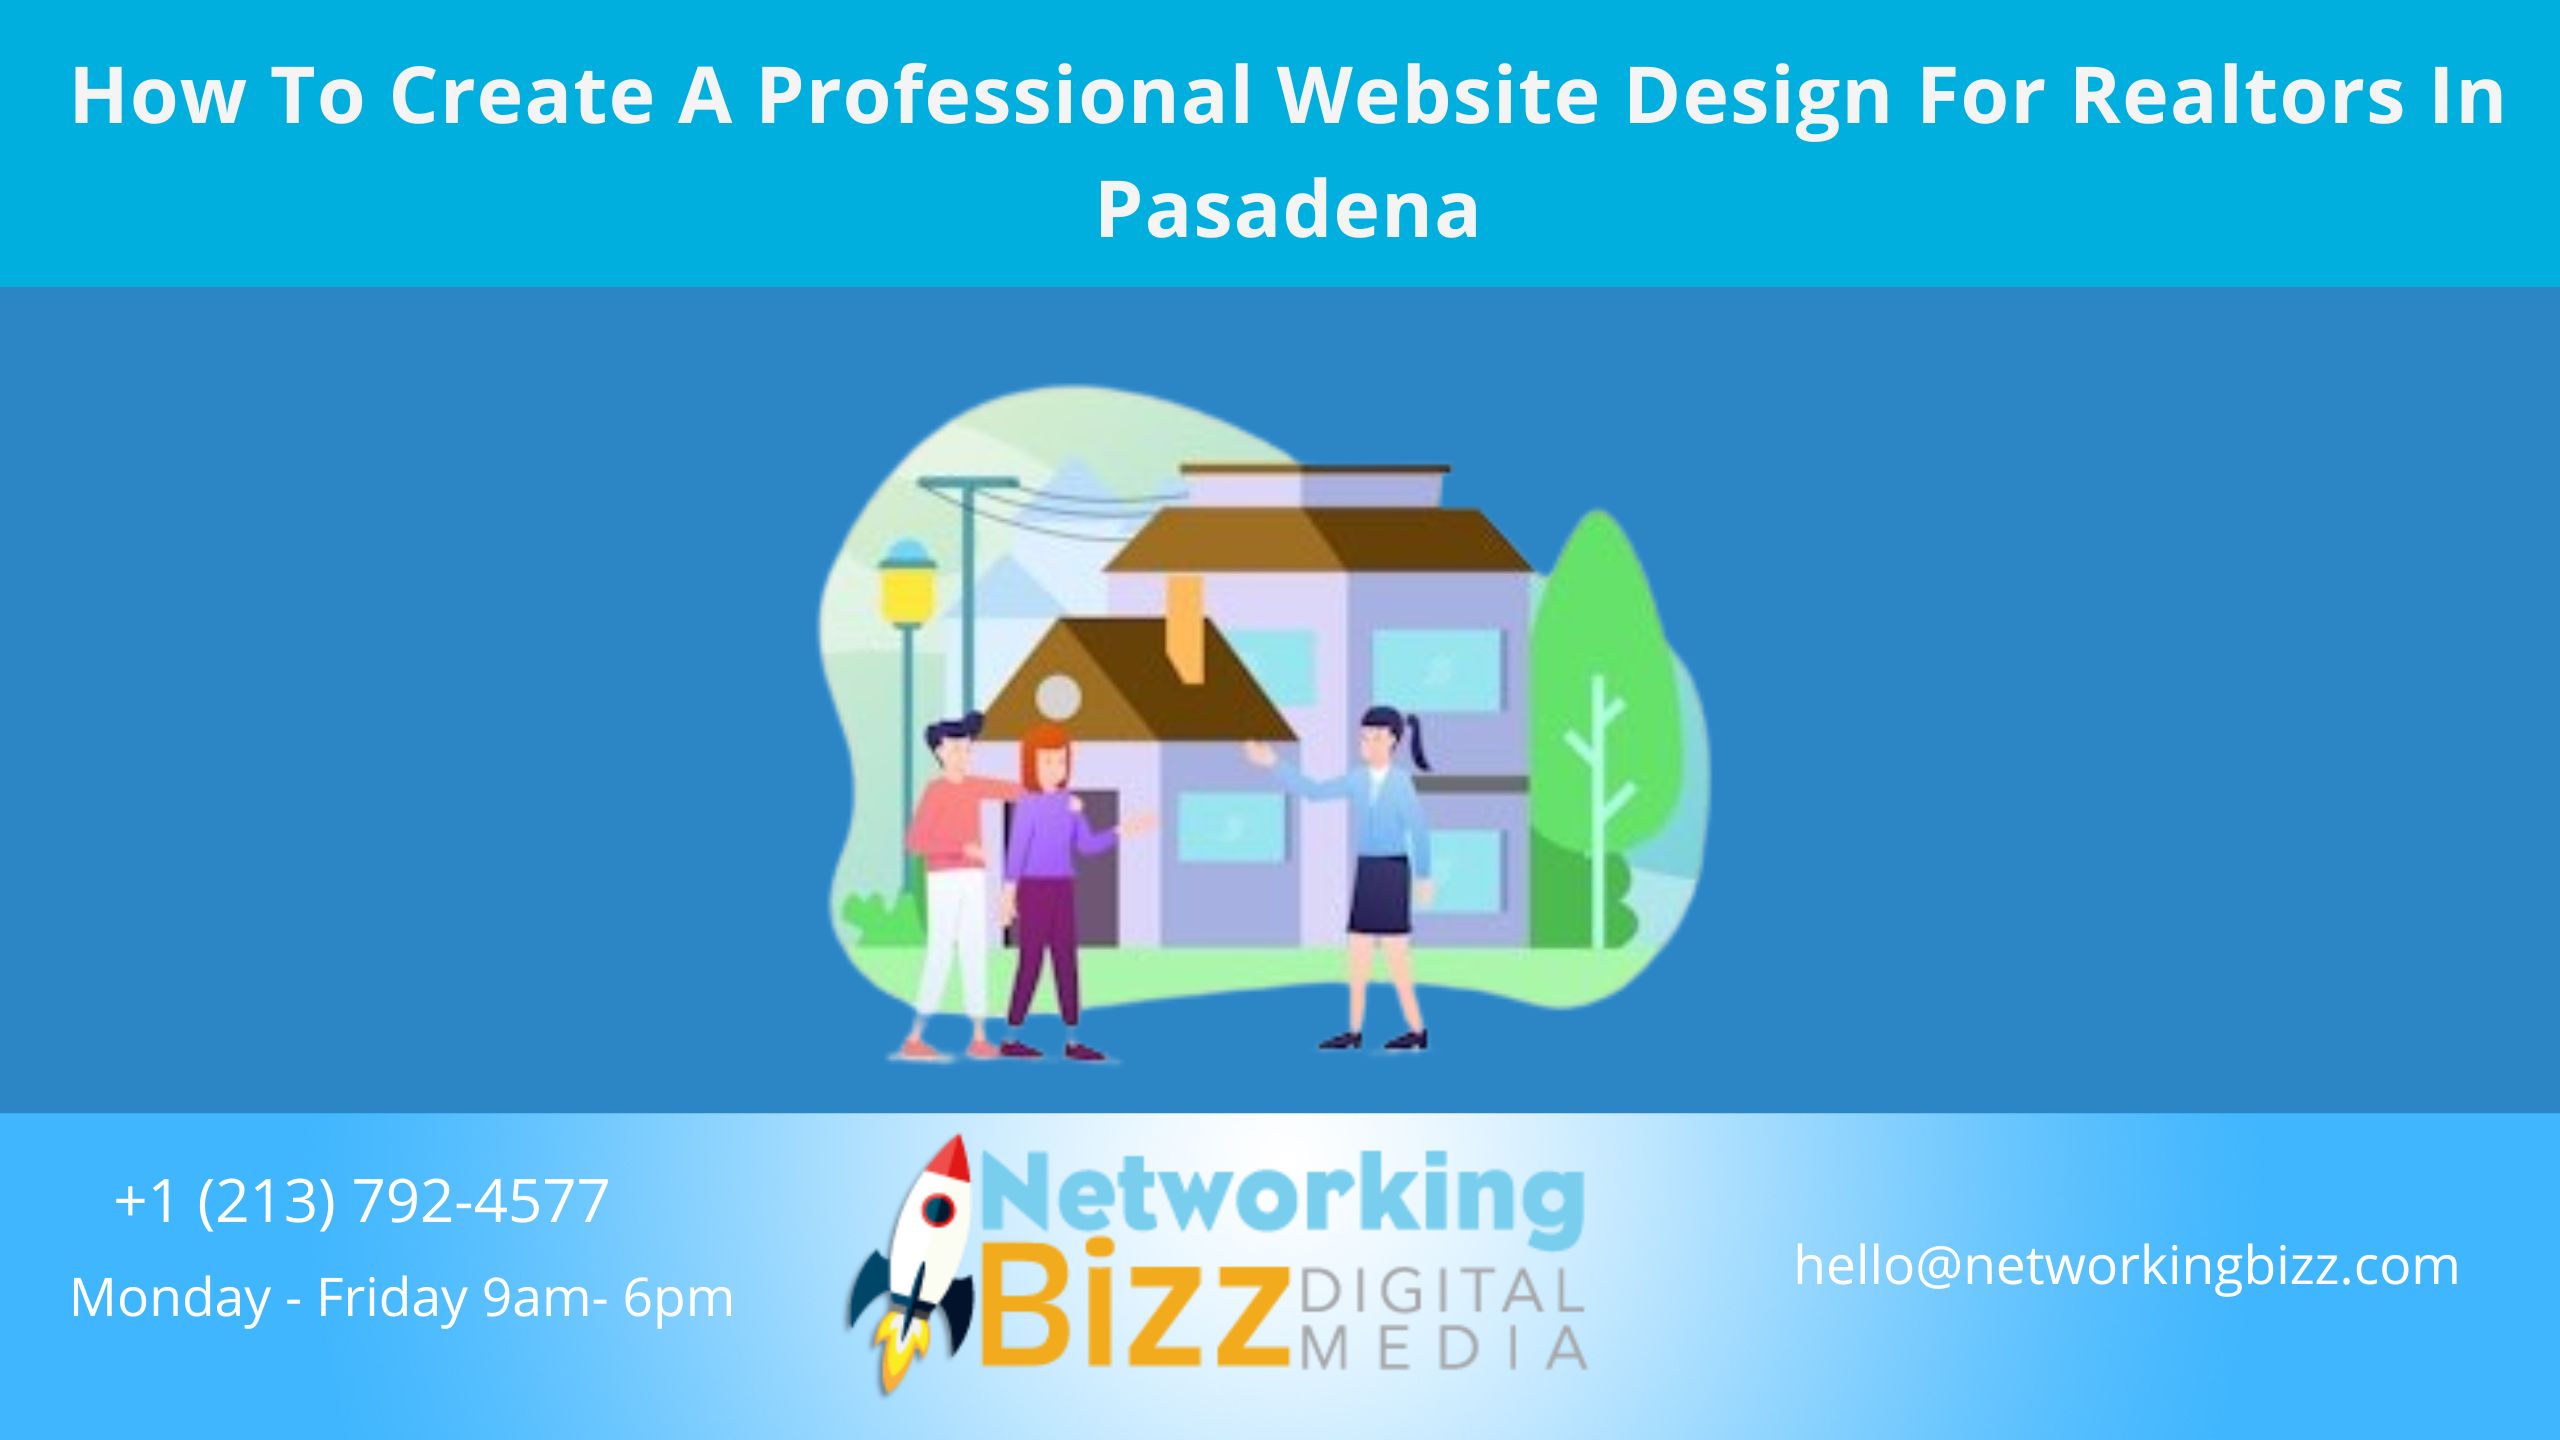 How To Create A Professional Website Design For Realtors In Pasadena